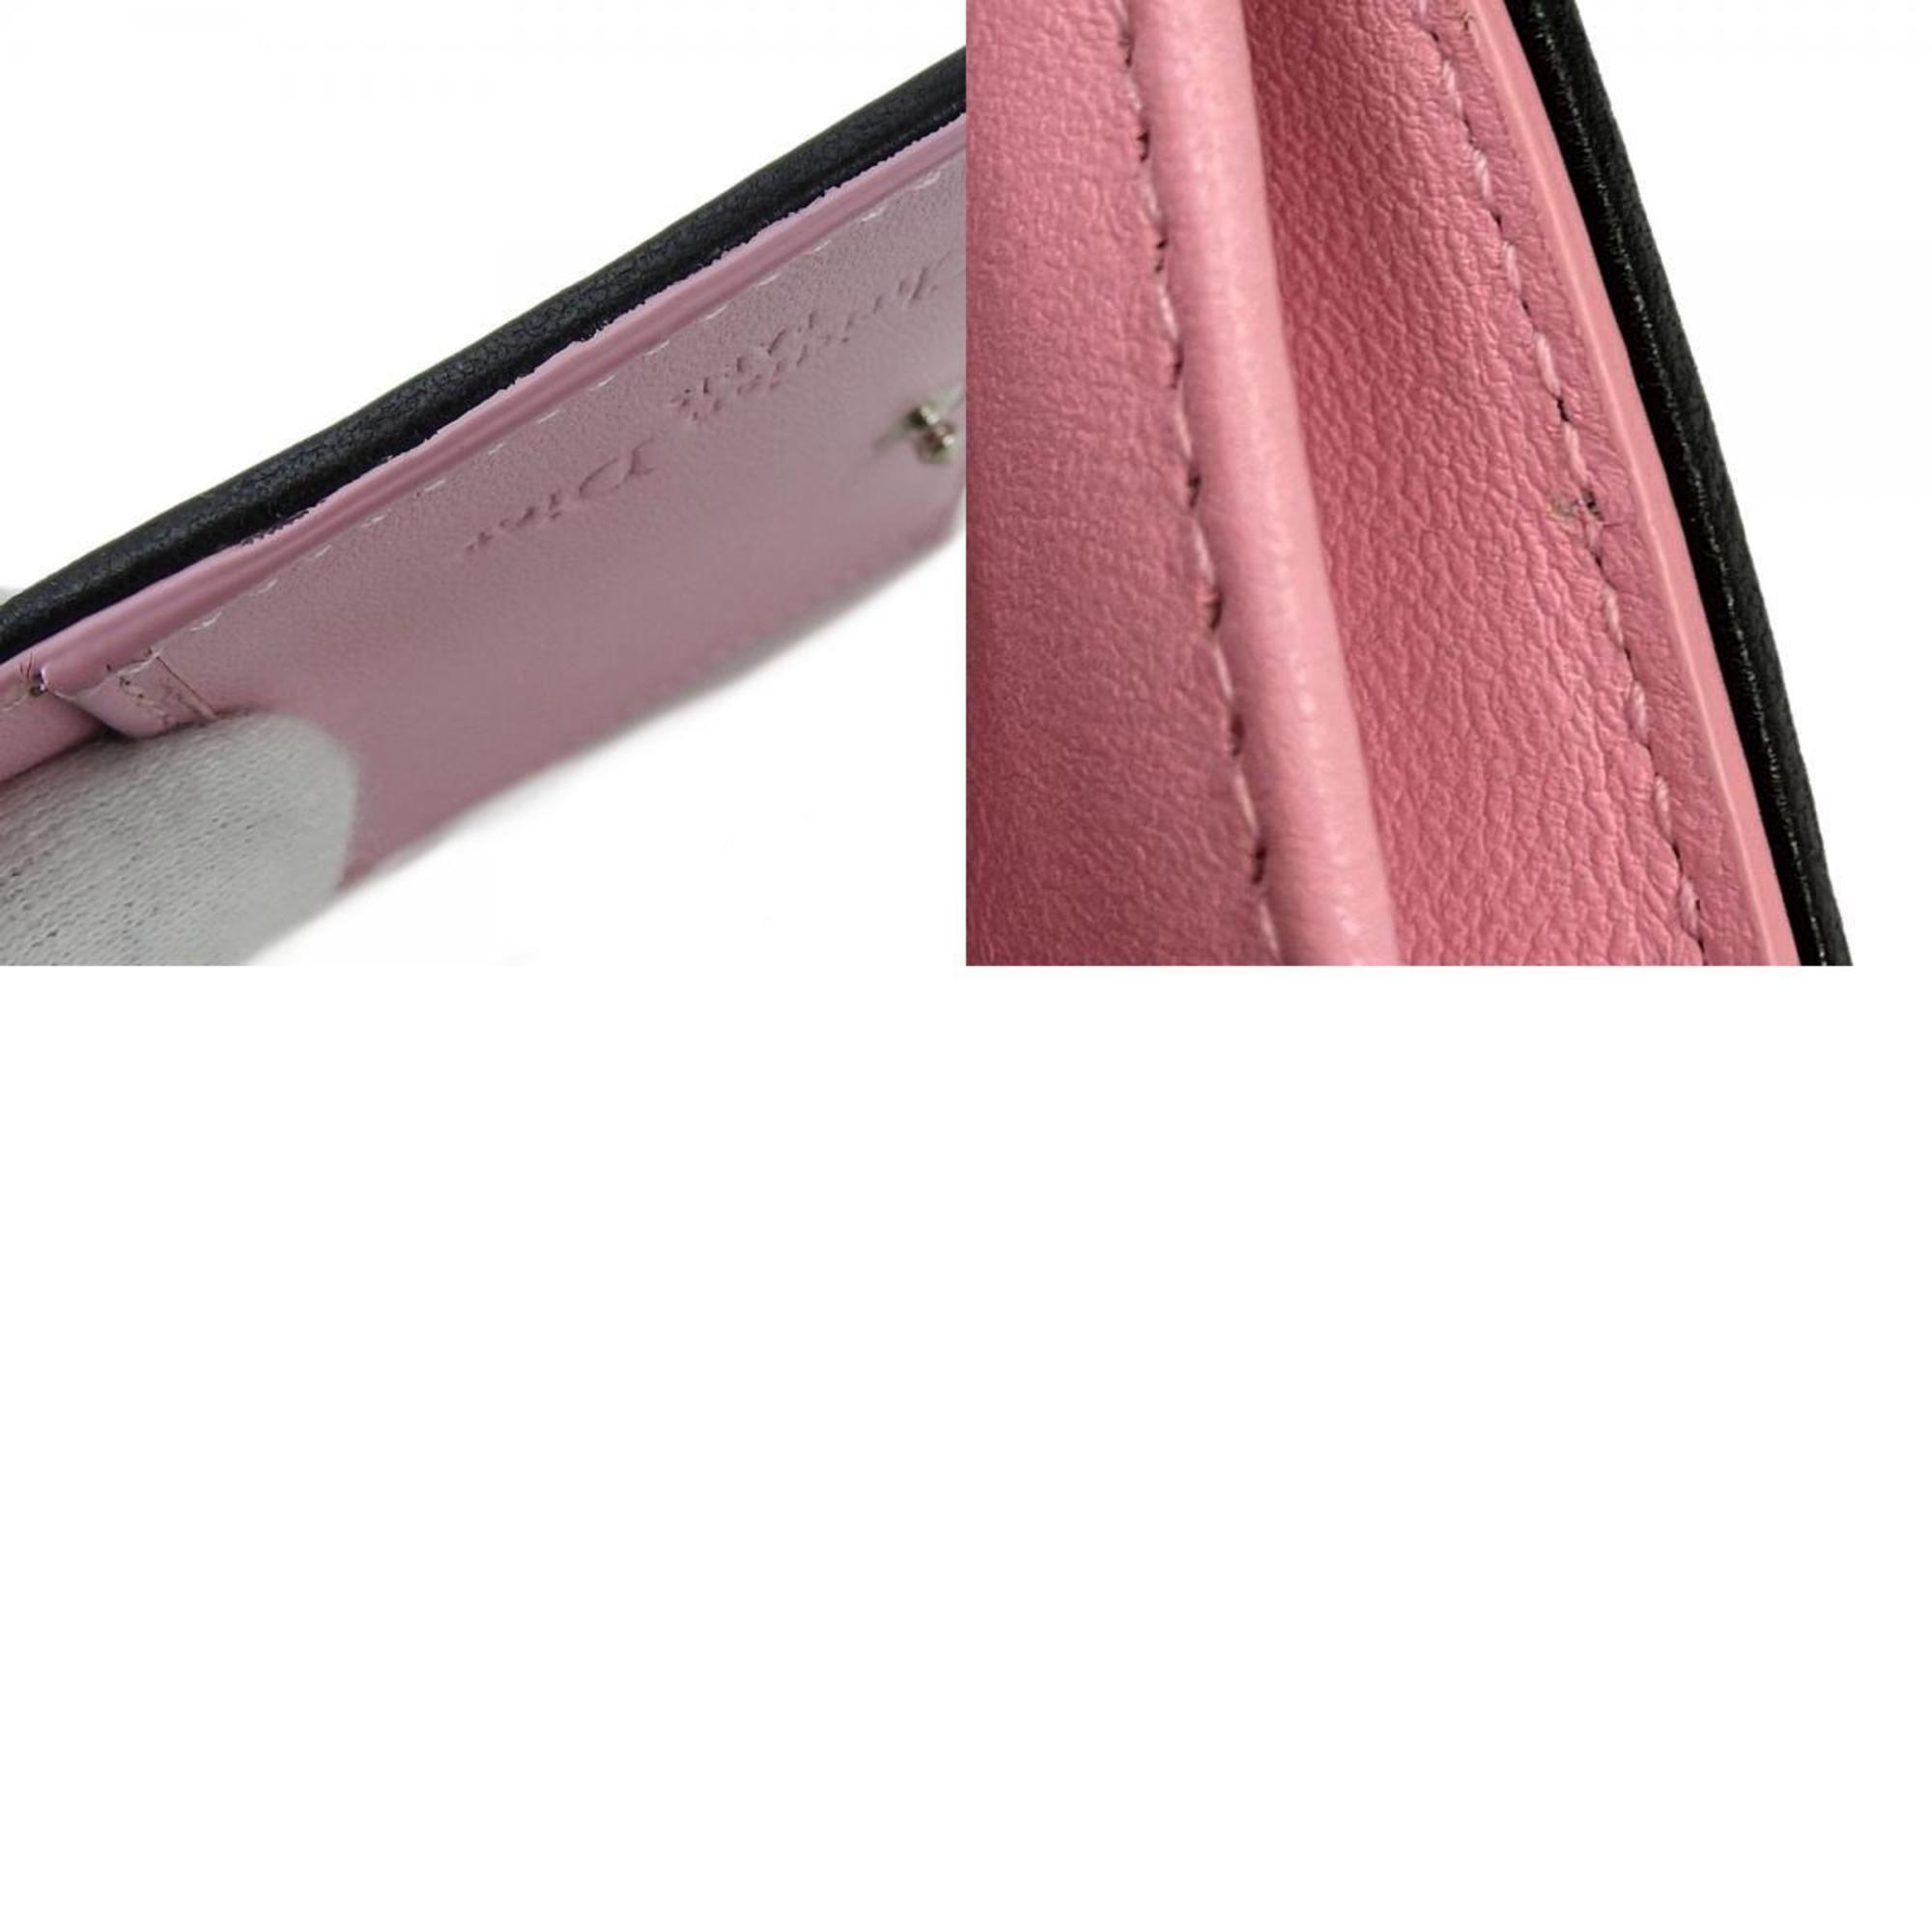 Christian Dior Business Card Holder/Card Case Cannage Leather Black Pink Accessories Women's